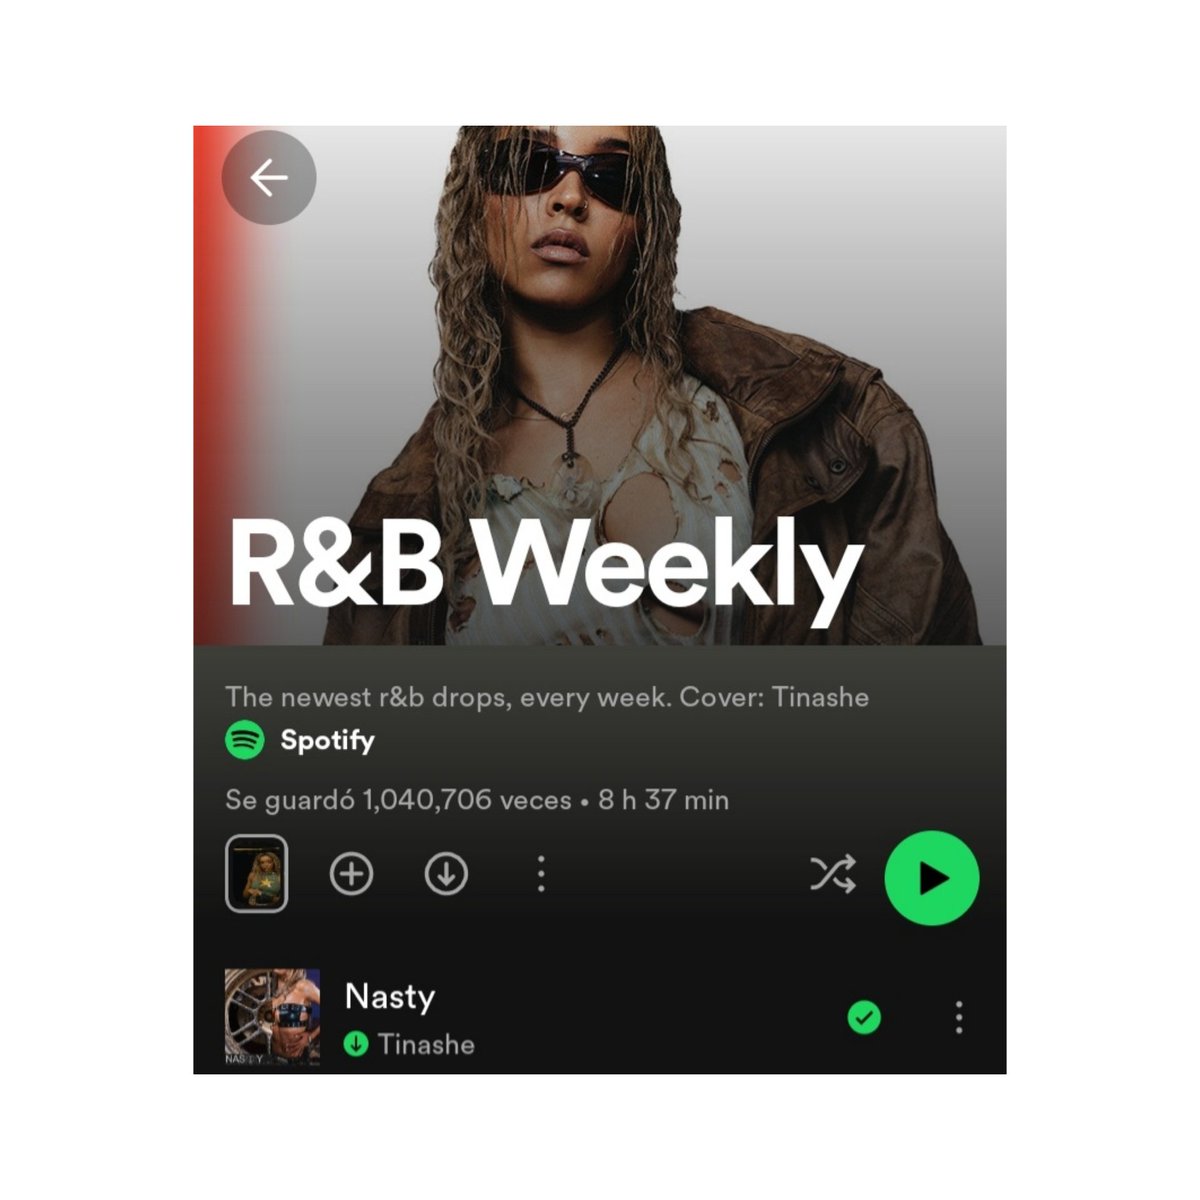 .@Tinashe is now the cover of @Spotify’s “R&B Weekly” playlist with “Nasty” at #1.